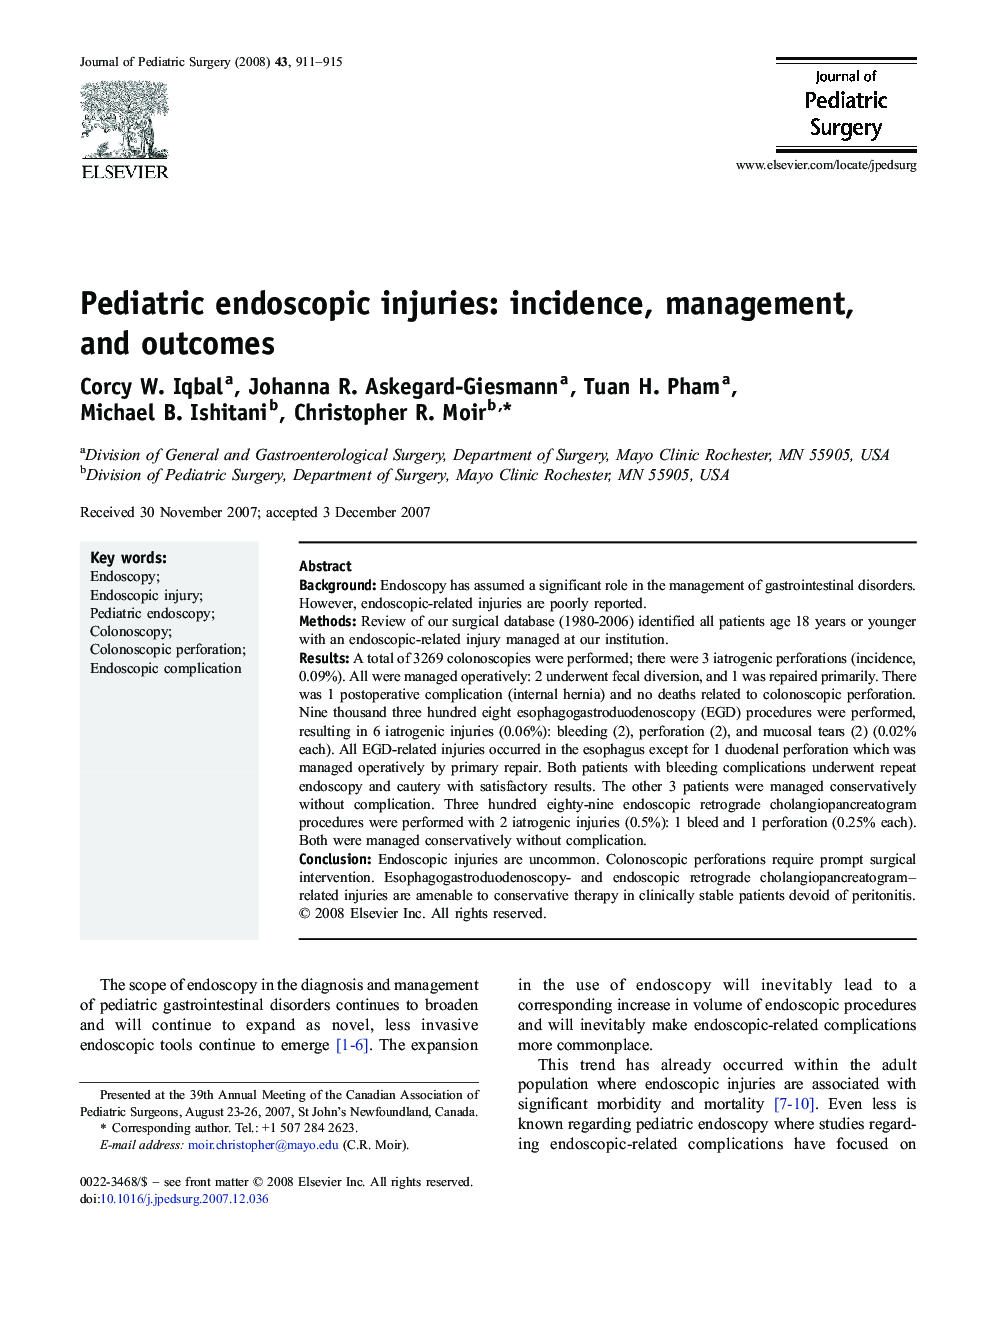 Pediatric endoscopic injuries: incidence, management, and outcomes 